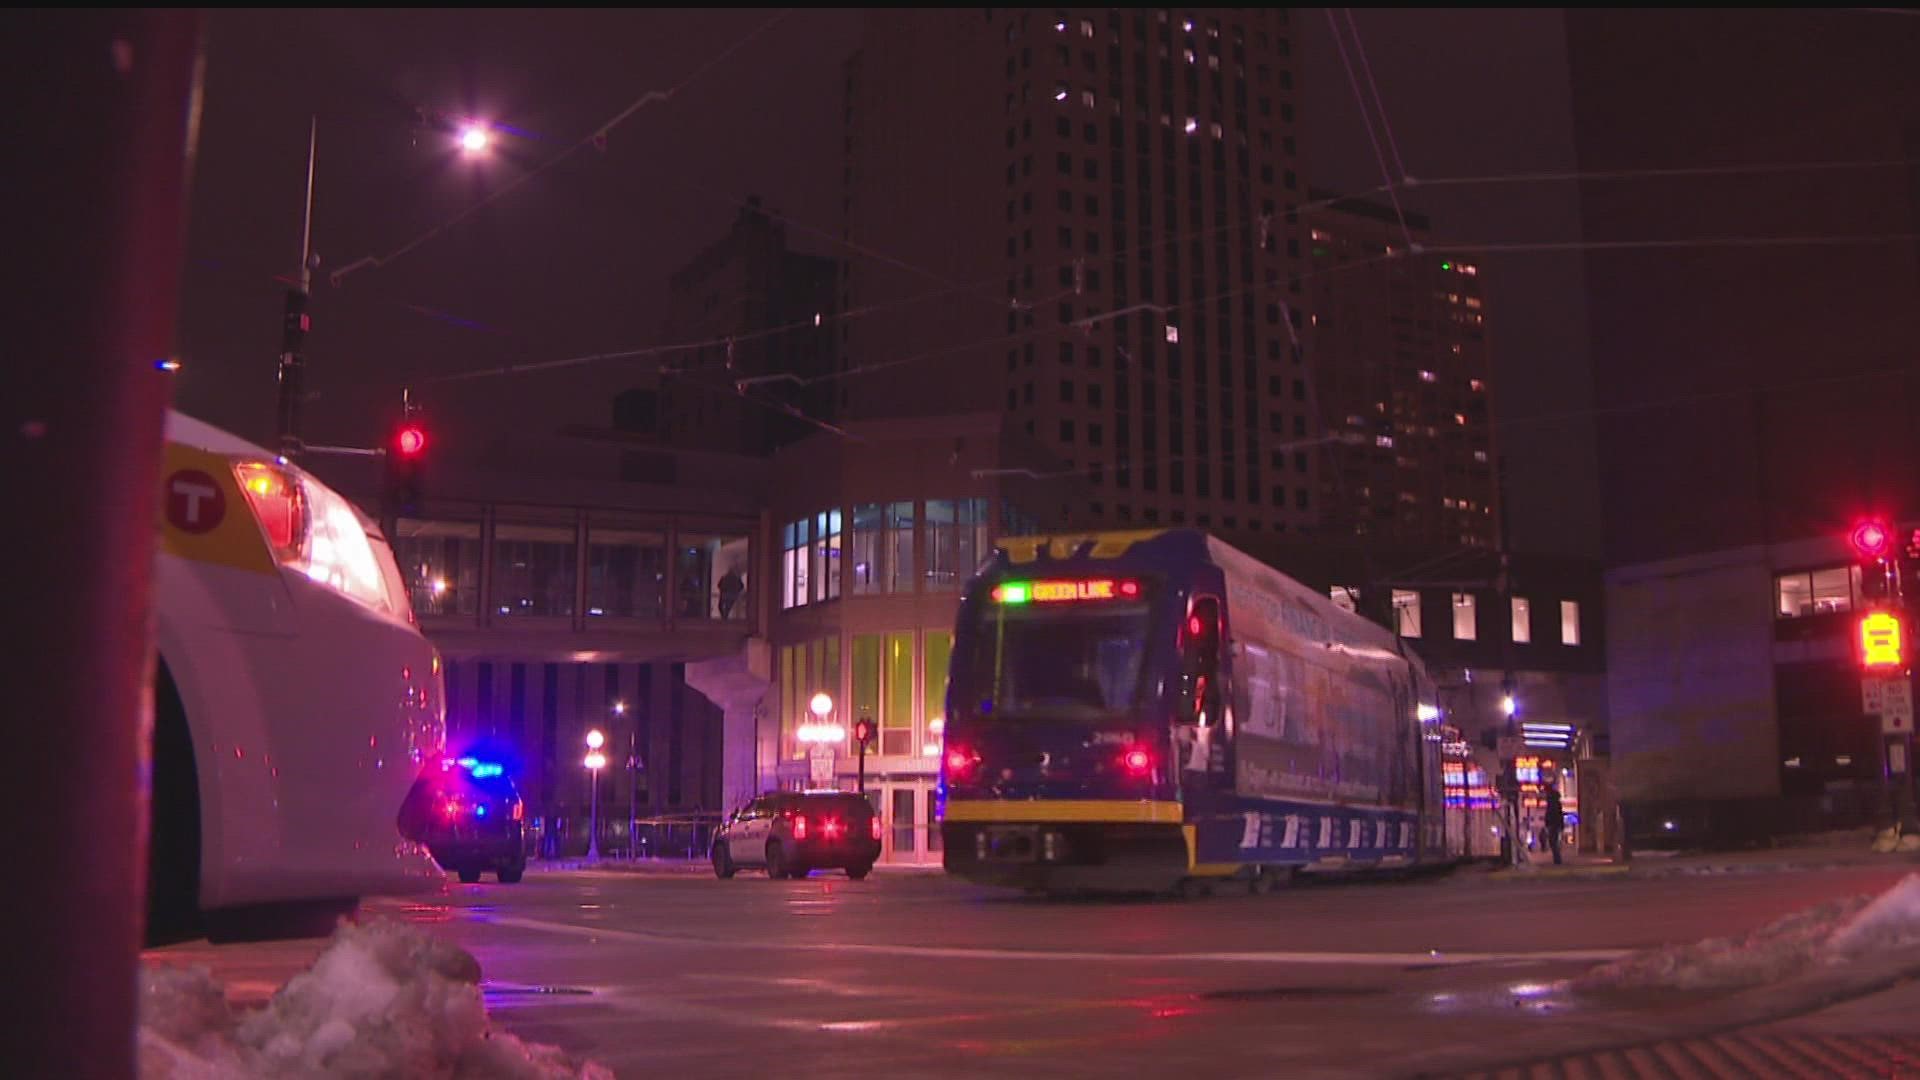 Metro Transit officials said shots were fired inside a building connected to the station around 8:30 p.m. Monday.